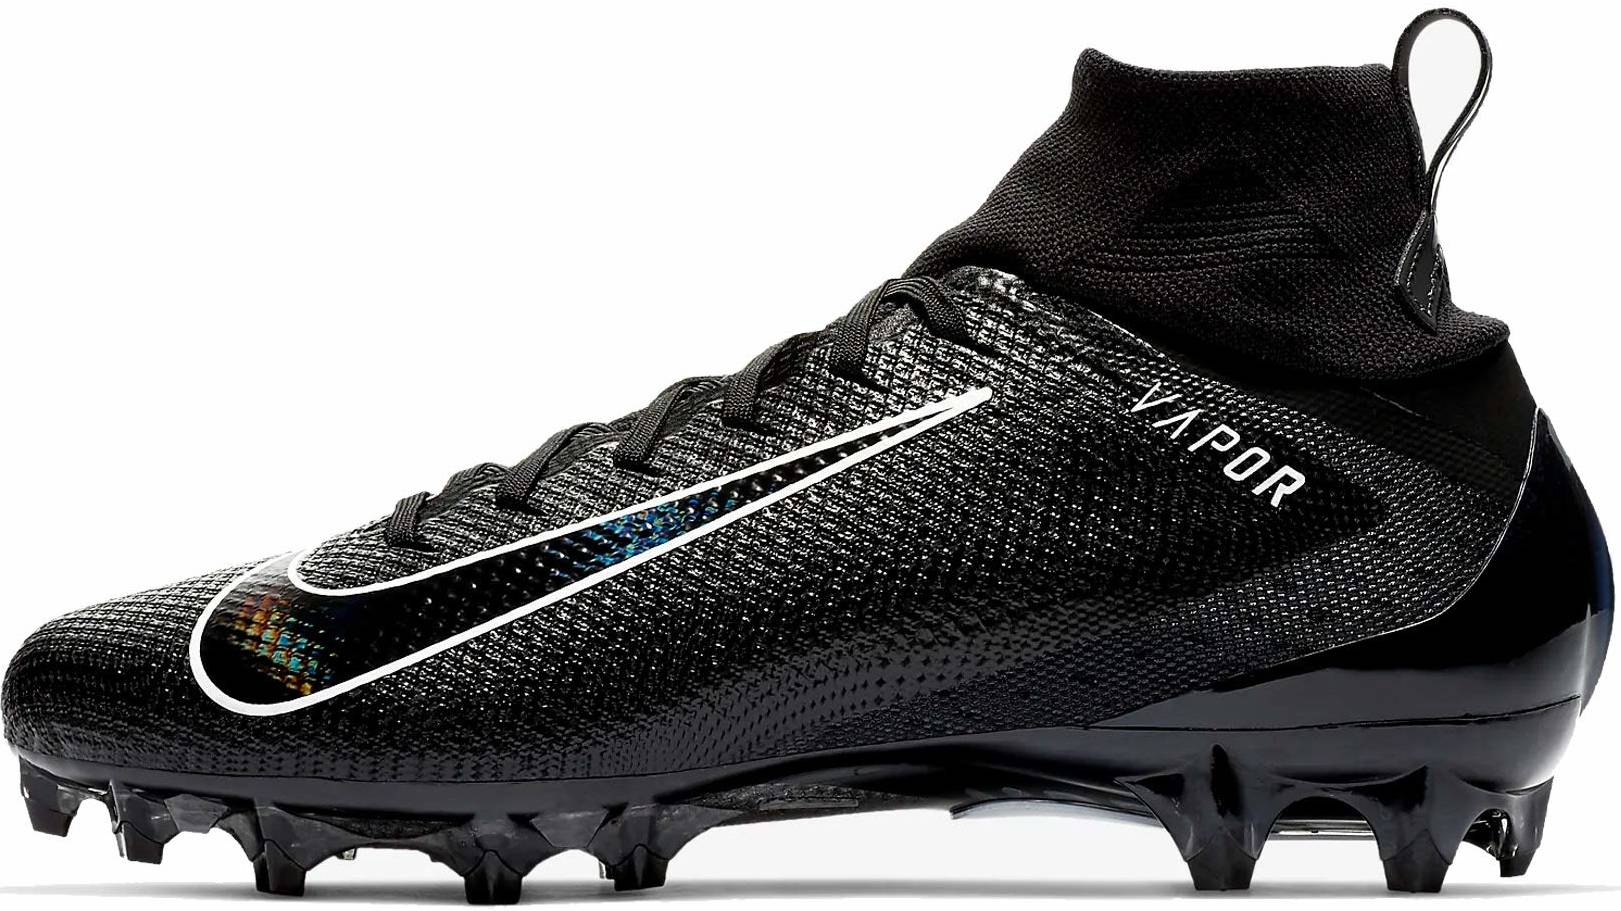 Save 66% on Football Cleats (41 Models 